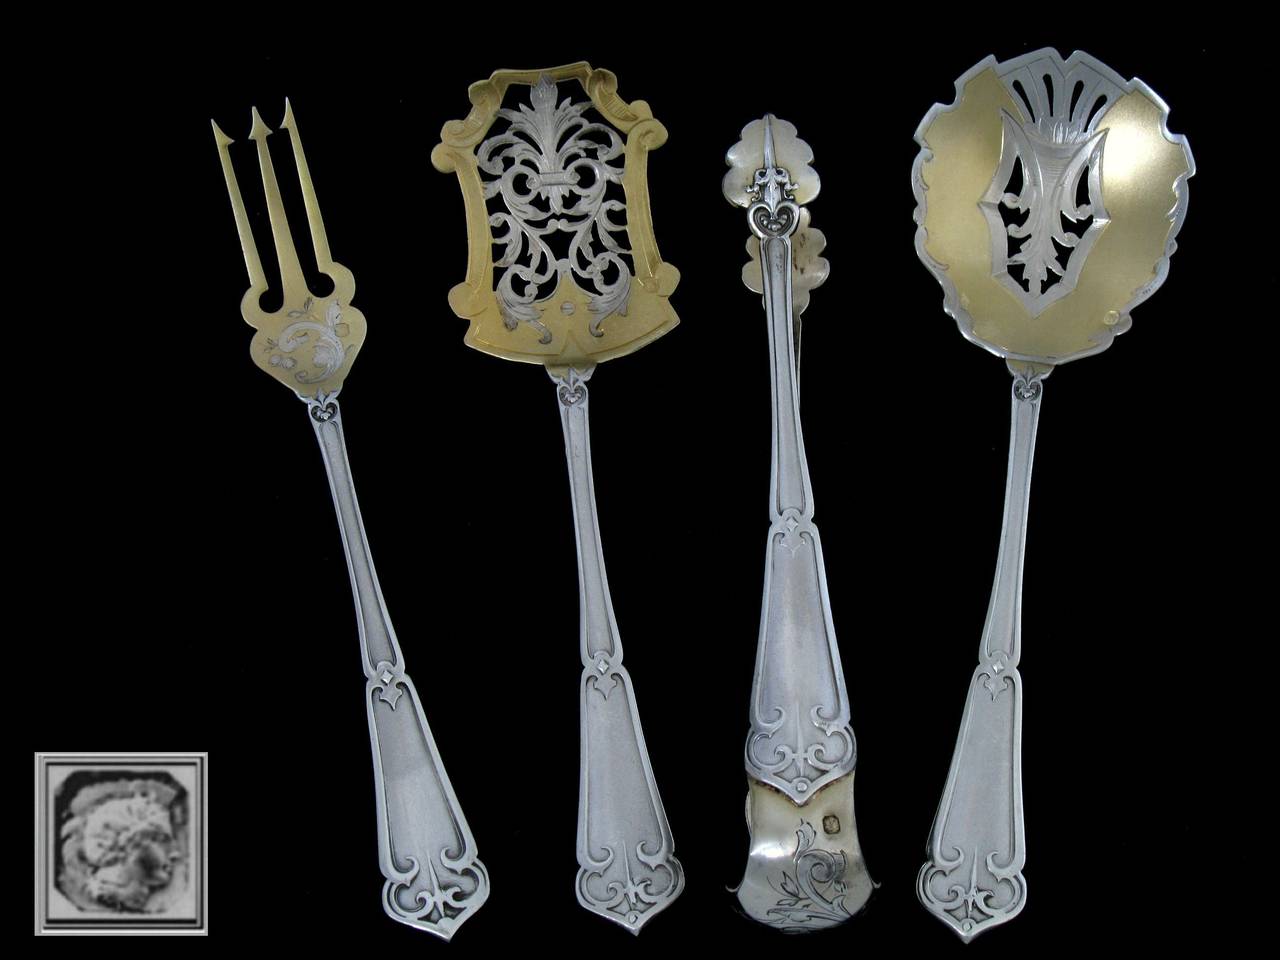 Soufflot French All Sterling Silver Dessert Hors D'oeuvre Set 4 pc w/box Ferrure

Head of Minerve 1 st titre for 950/1000 French Sterling Silver Vermeil guarantee. The quality of the gold used to recover sterling silver is a minimum of 750 mils